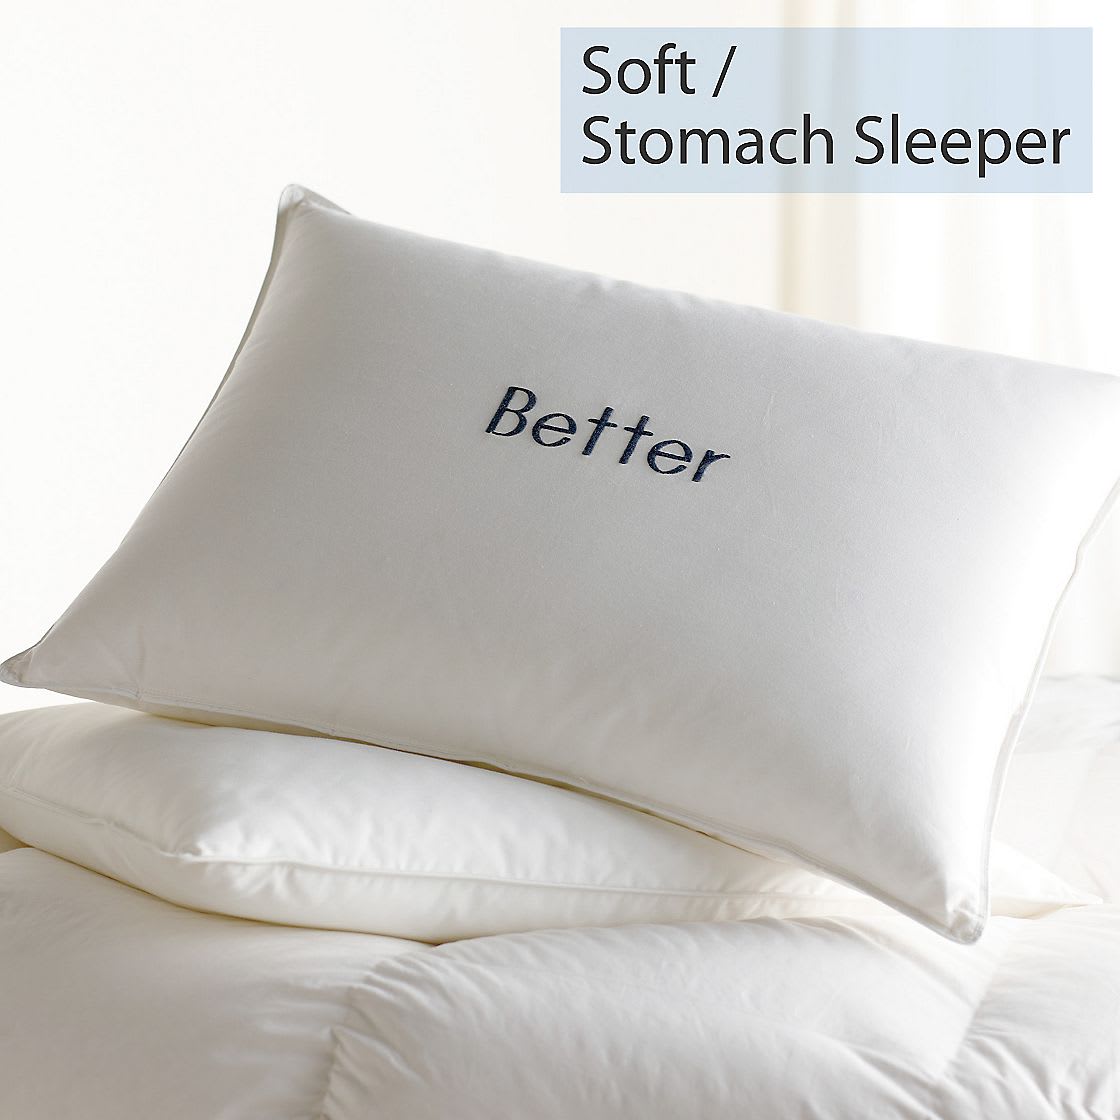 Better Down and Feather Stomach Sleeper Soft Density Pillow - White